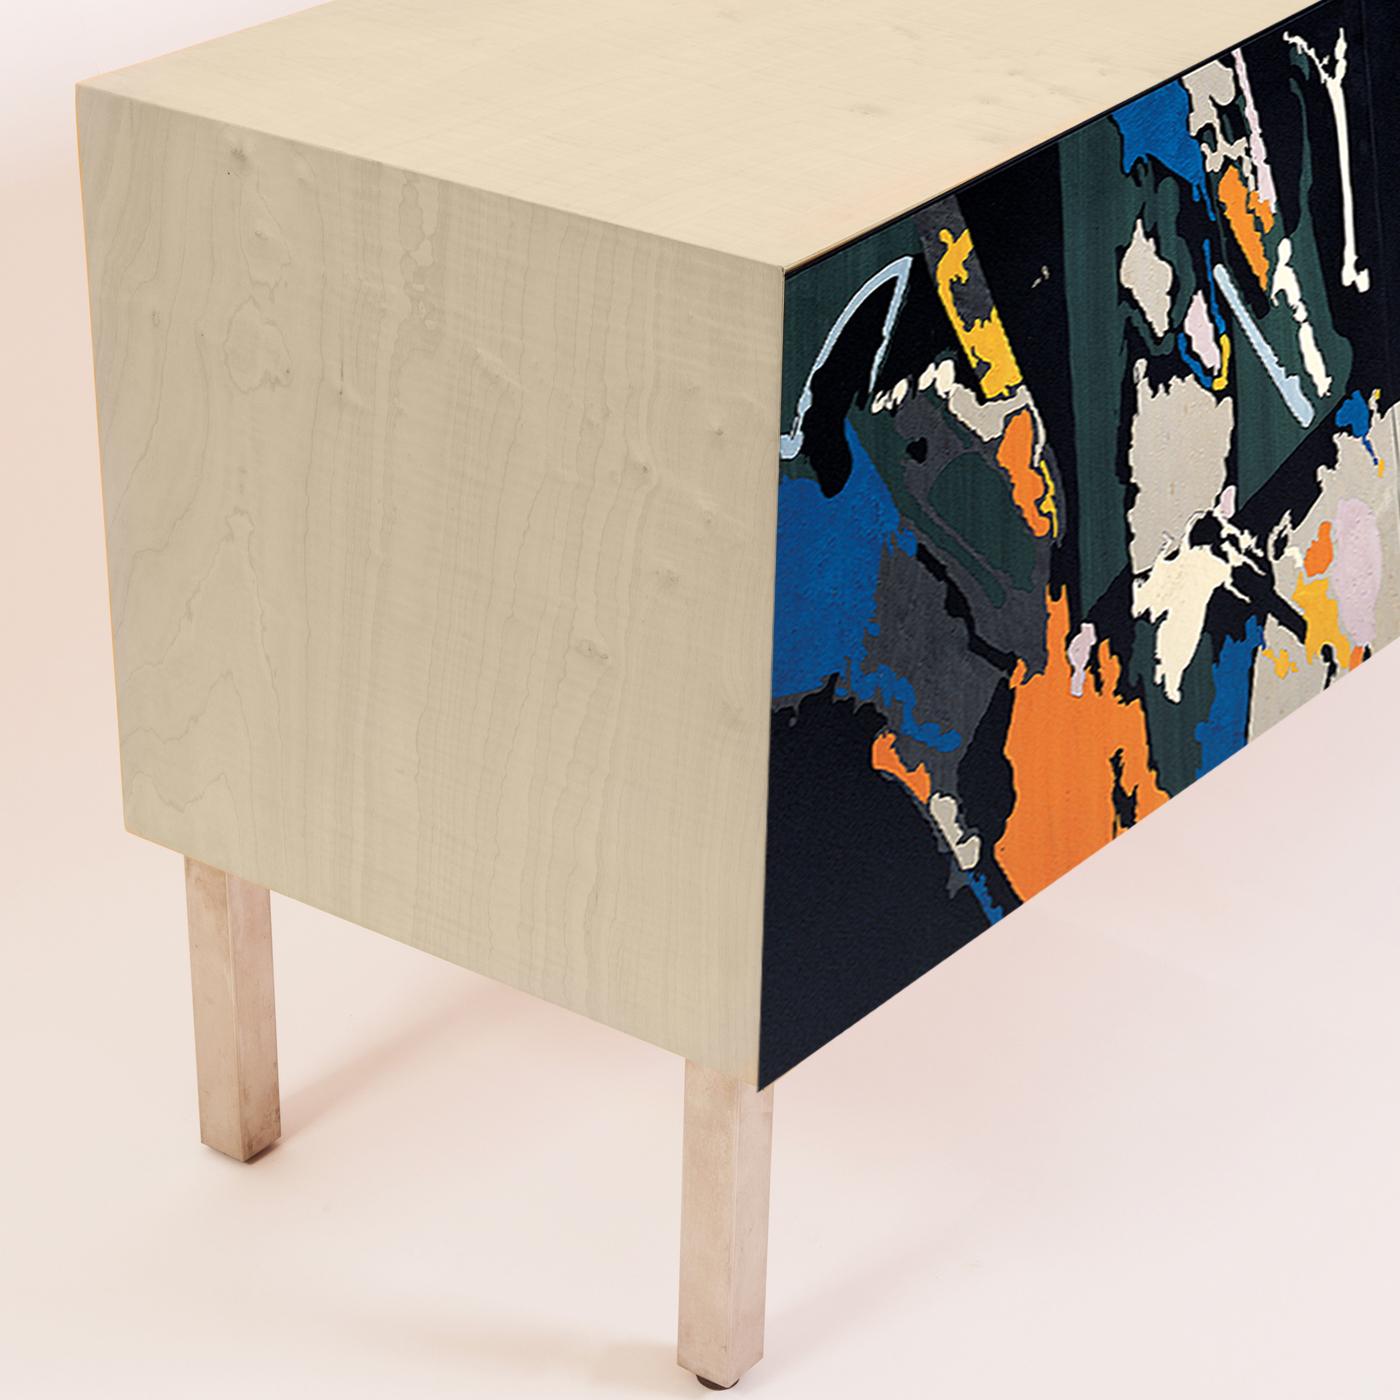 Storage transformed in art. This sideboard designed by Edoardo Franceschini and handcrafted by the skilled carpenters of Laura Meroni betrays a singularly post-modern flair. Crafted using poplar and maple wood veneer, the cabinet opens to reveal